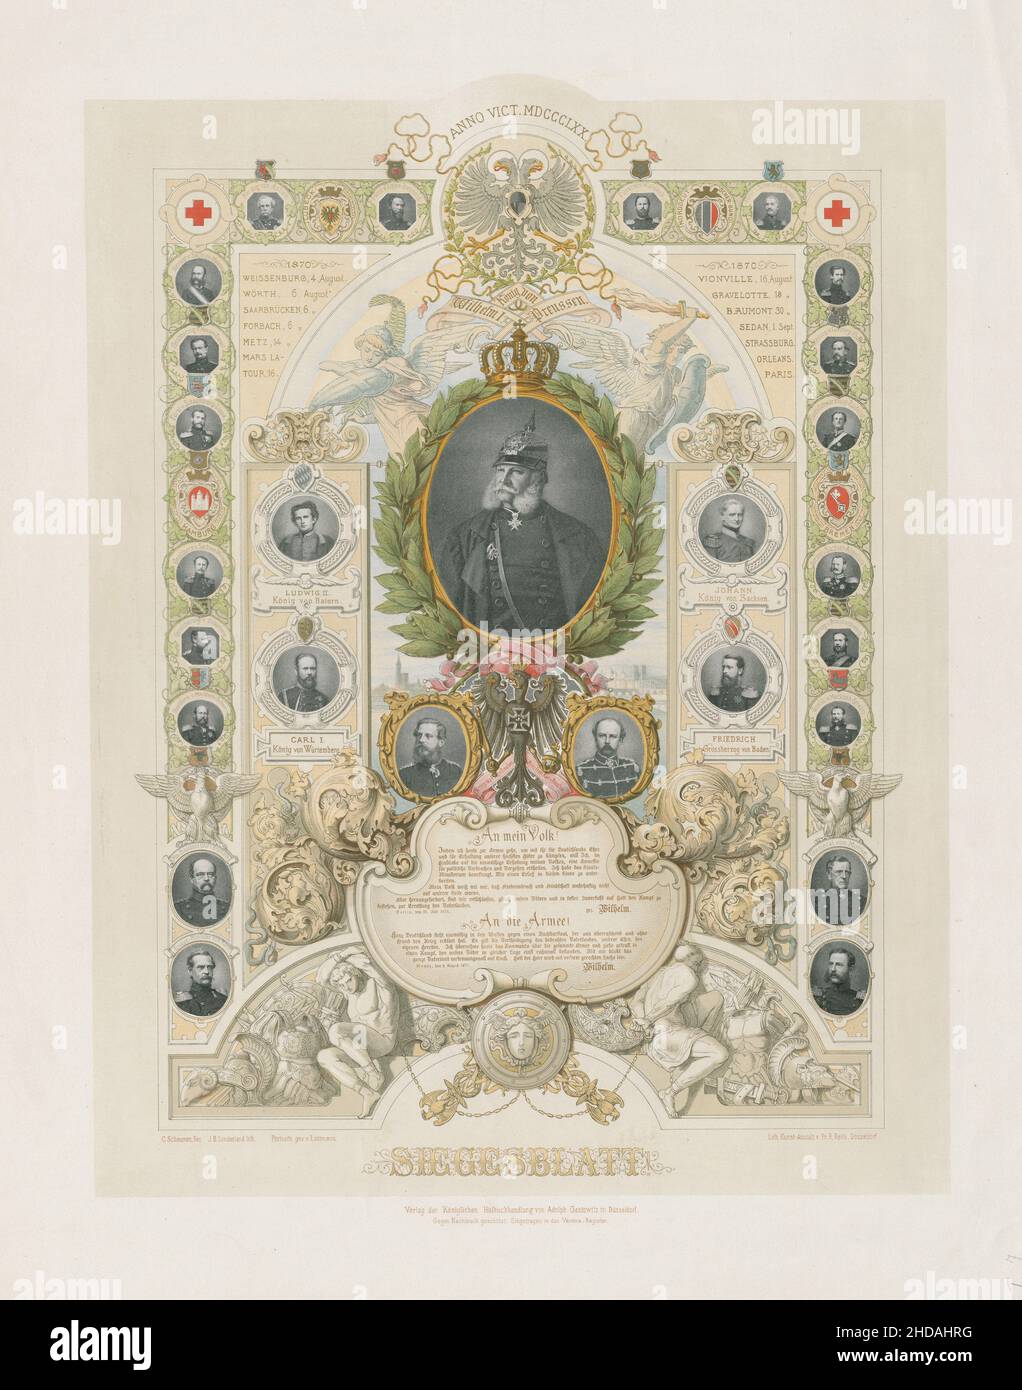 German lithograph: Victory Sheet! 1870 A lithograph depicting the victory of Germany (Prussia) in the Franco-Prussian War of 1870-1871. Ludwig II koni Stock Photo